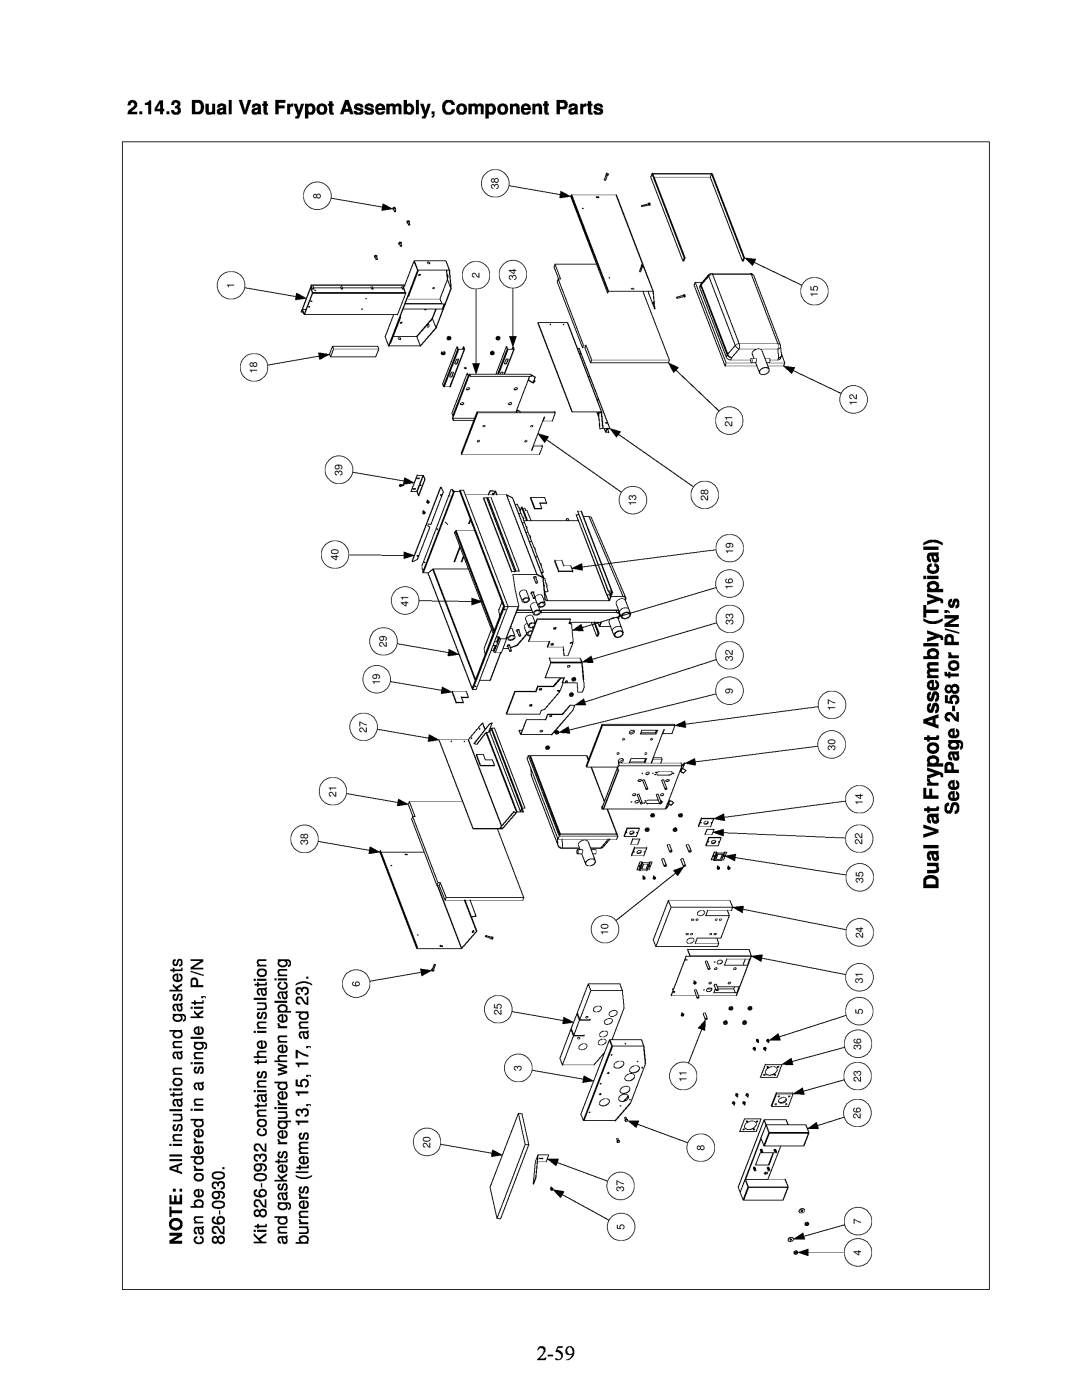 Frymaster H50 Series manual Dual Vat Frypot Assembly Typical, Assembly, Component Parts, See Page 2-58for P/N’s 